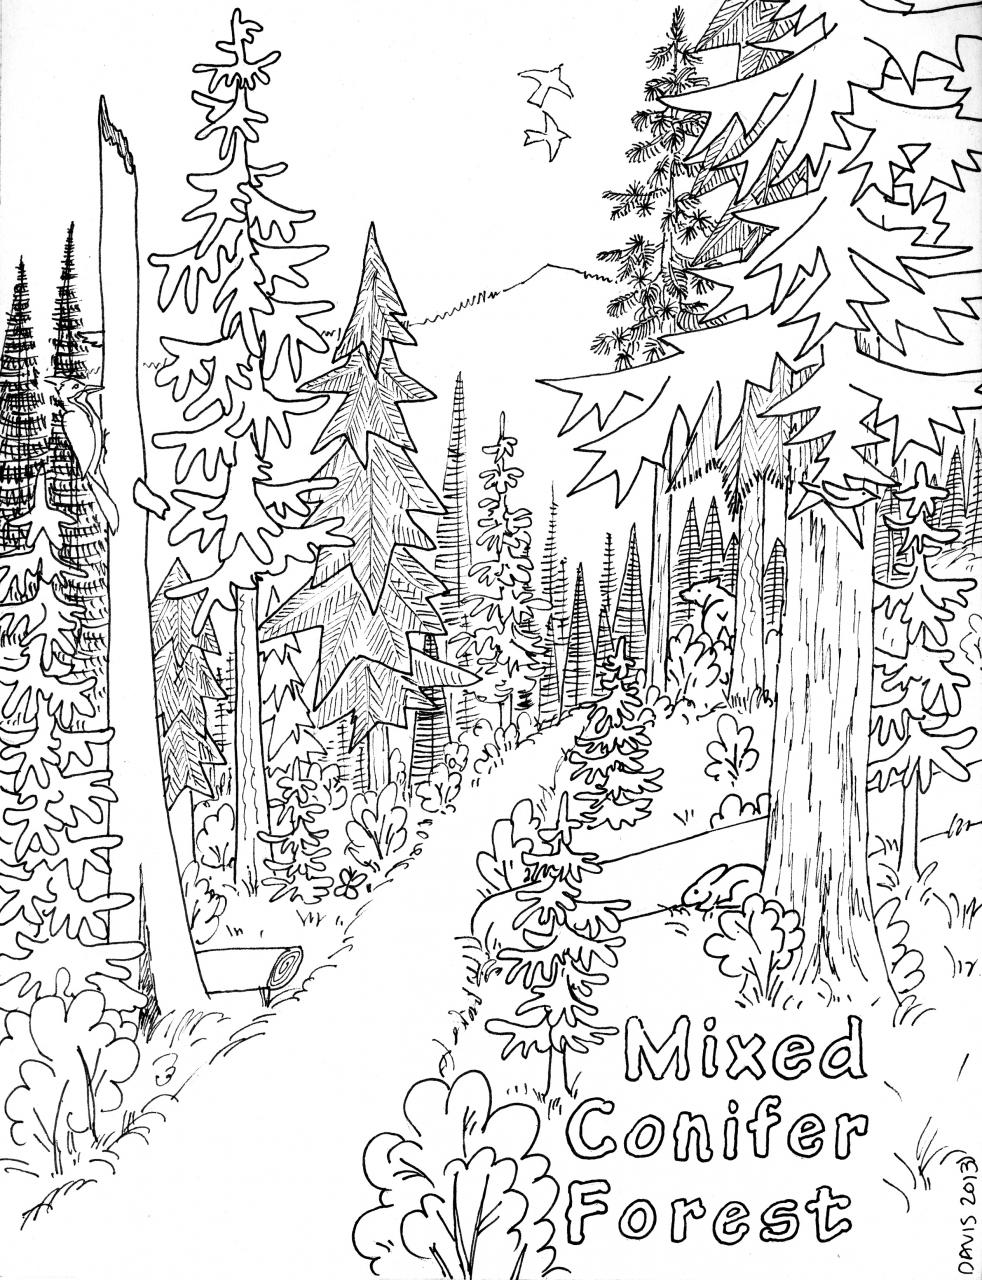 Coniferous Forest Coloring Page Coloring Page For Kids | Kids Coloring